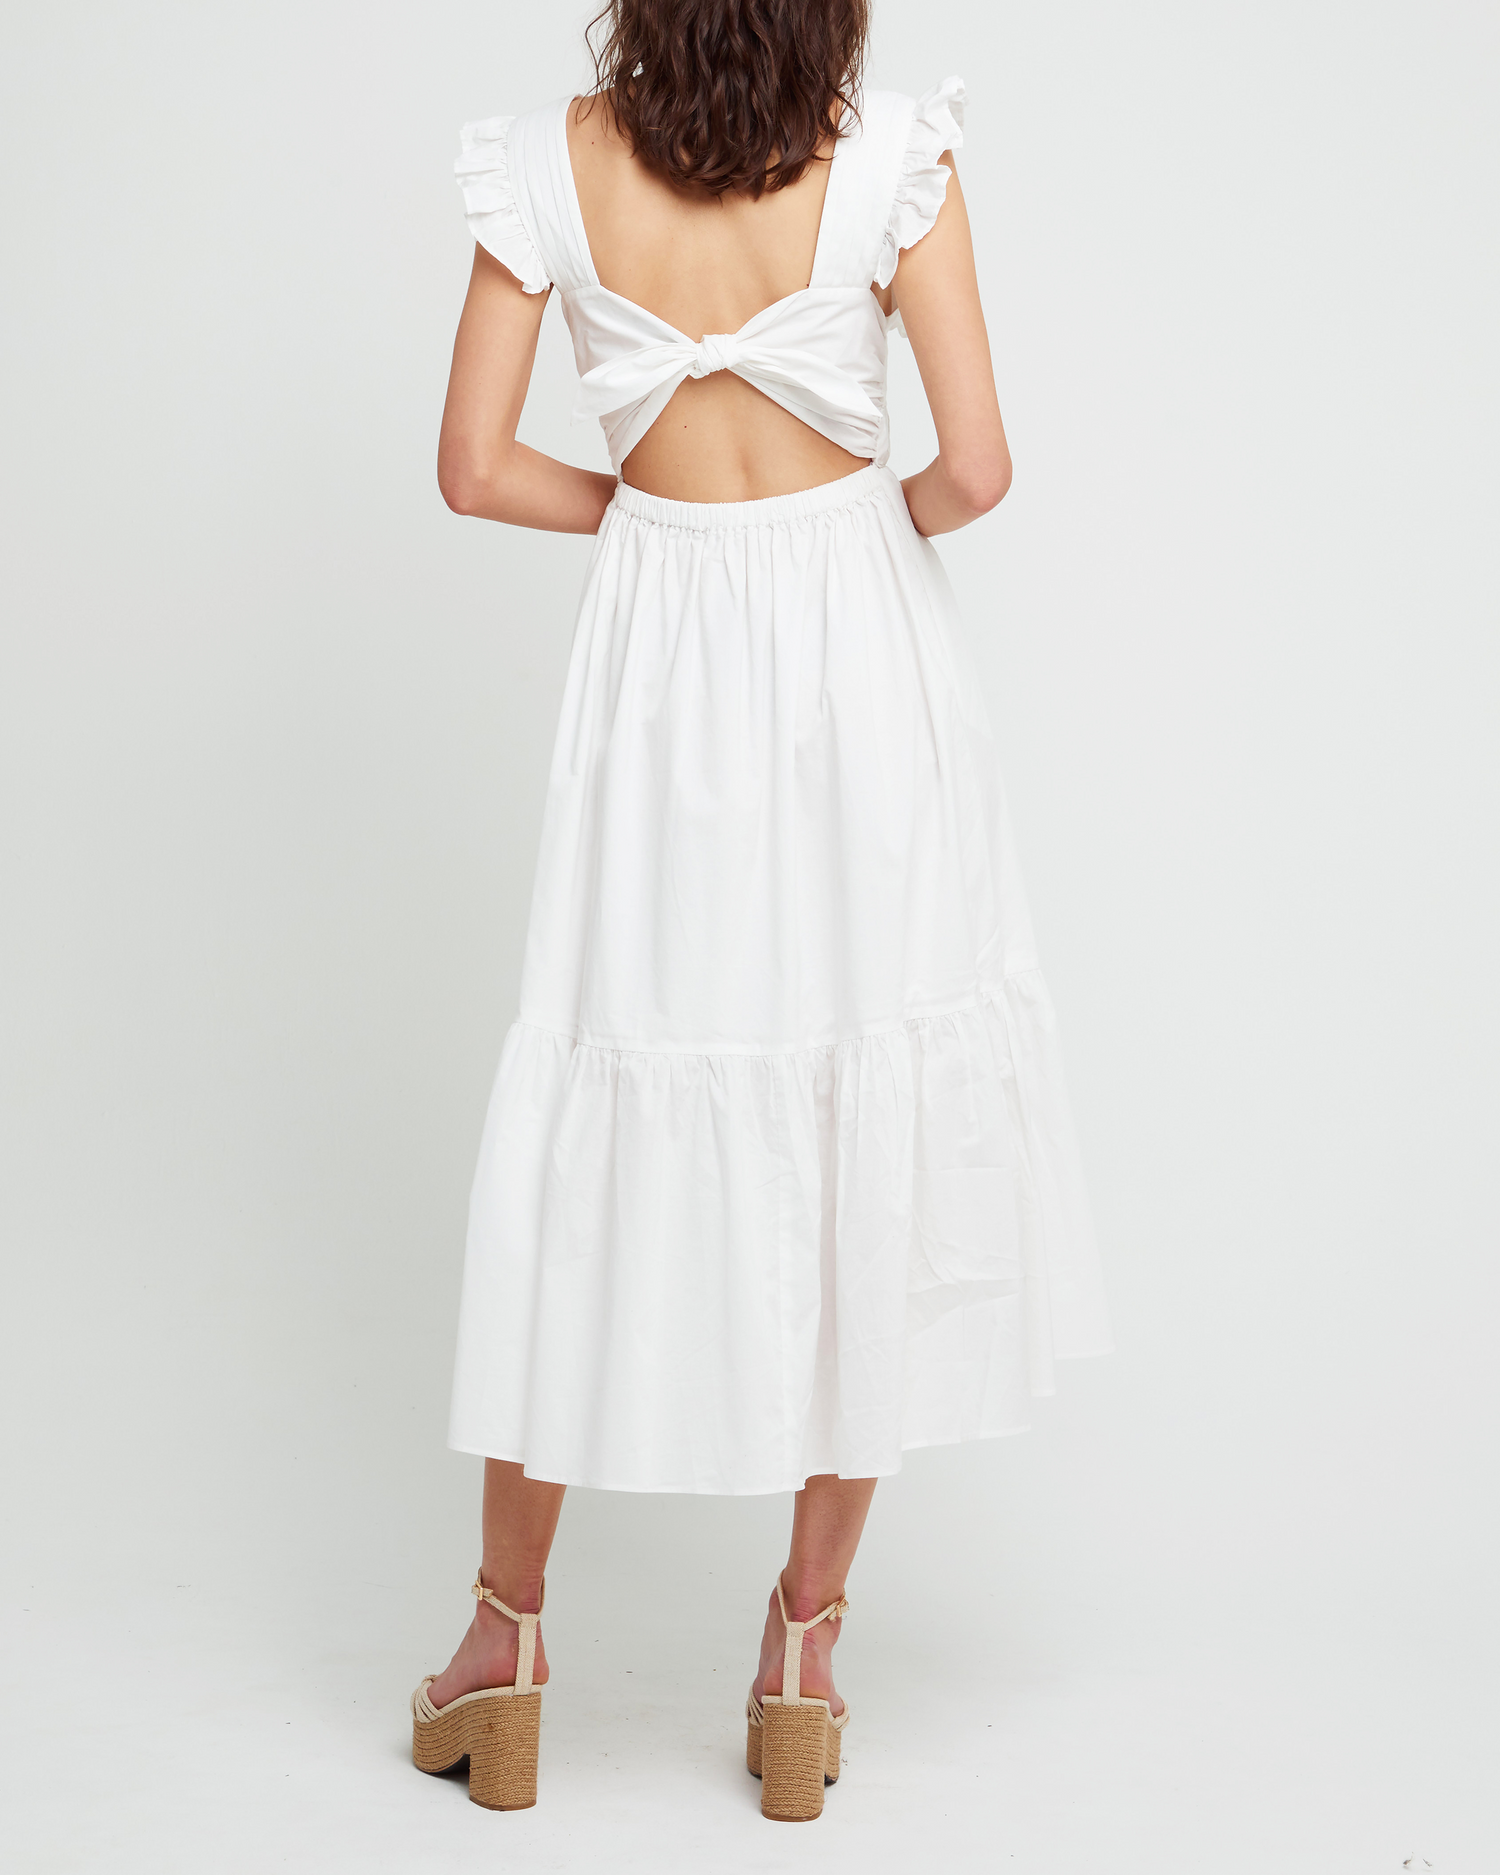 Second image of Stella Dress, a white midi dress, front buttons, ruffle sleeve, open back, tiered, tie, ribbon, bow